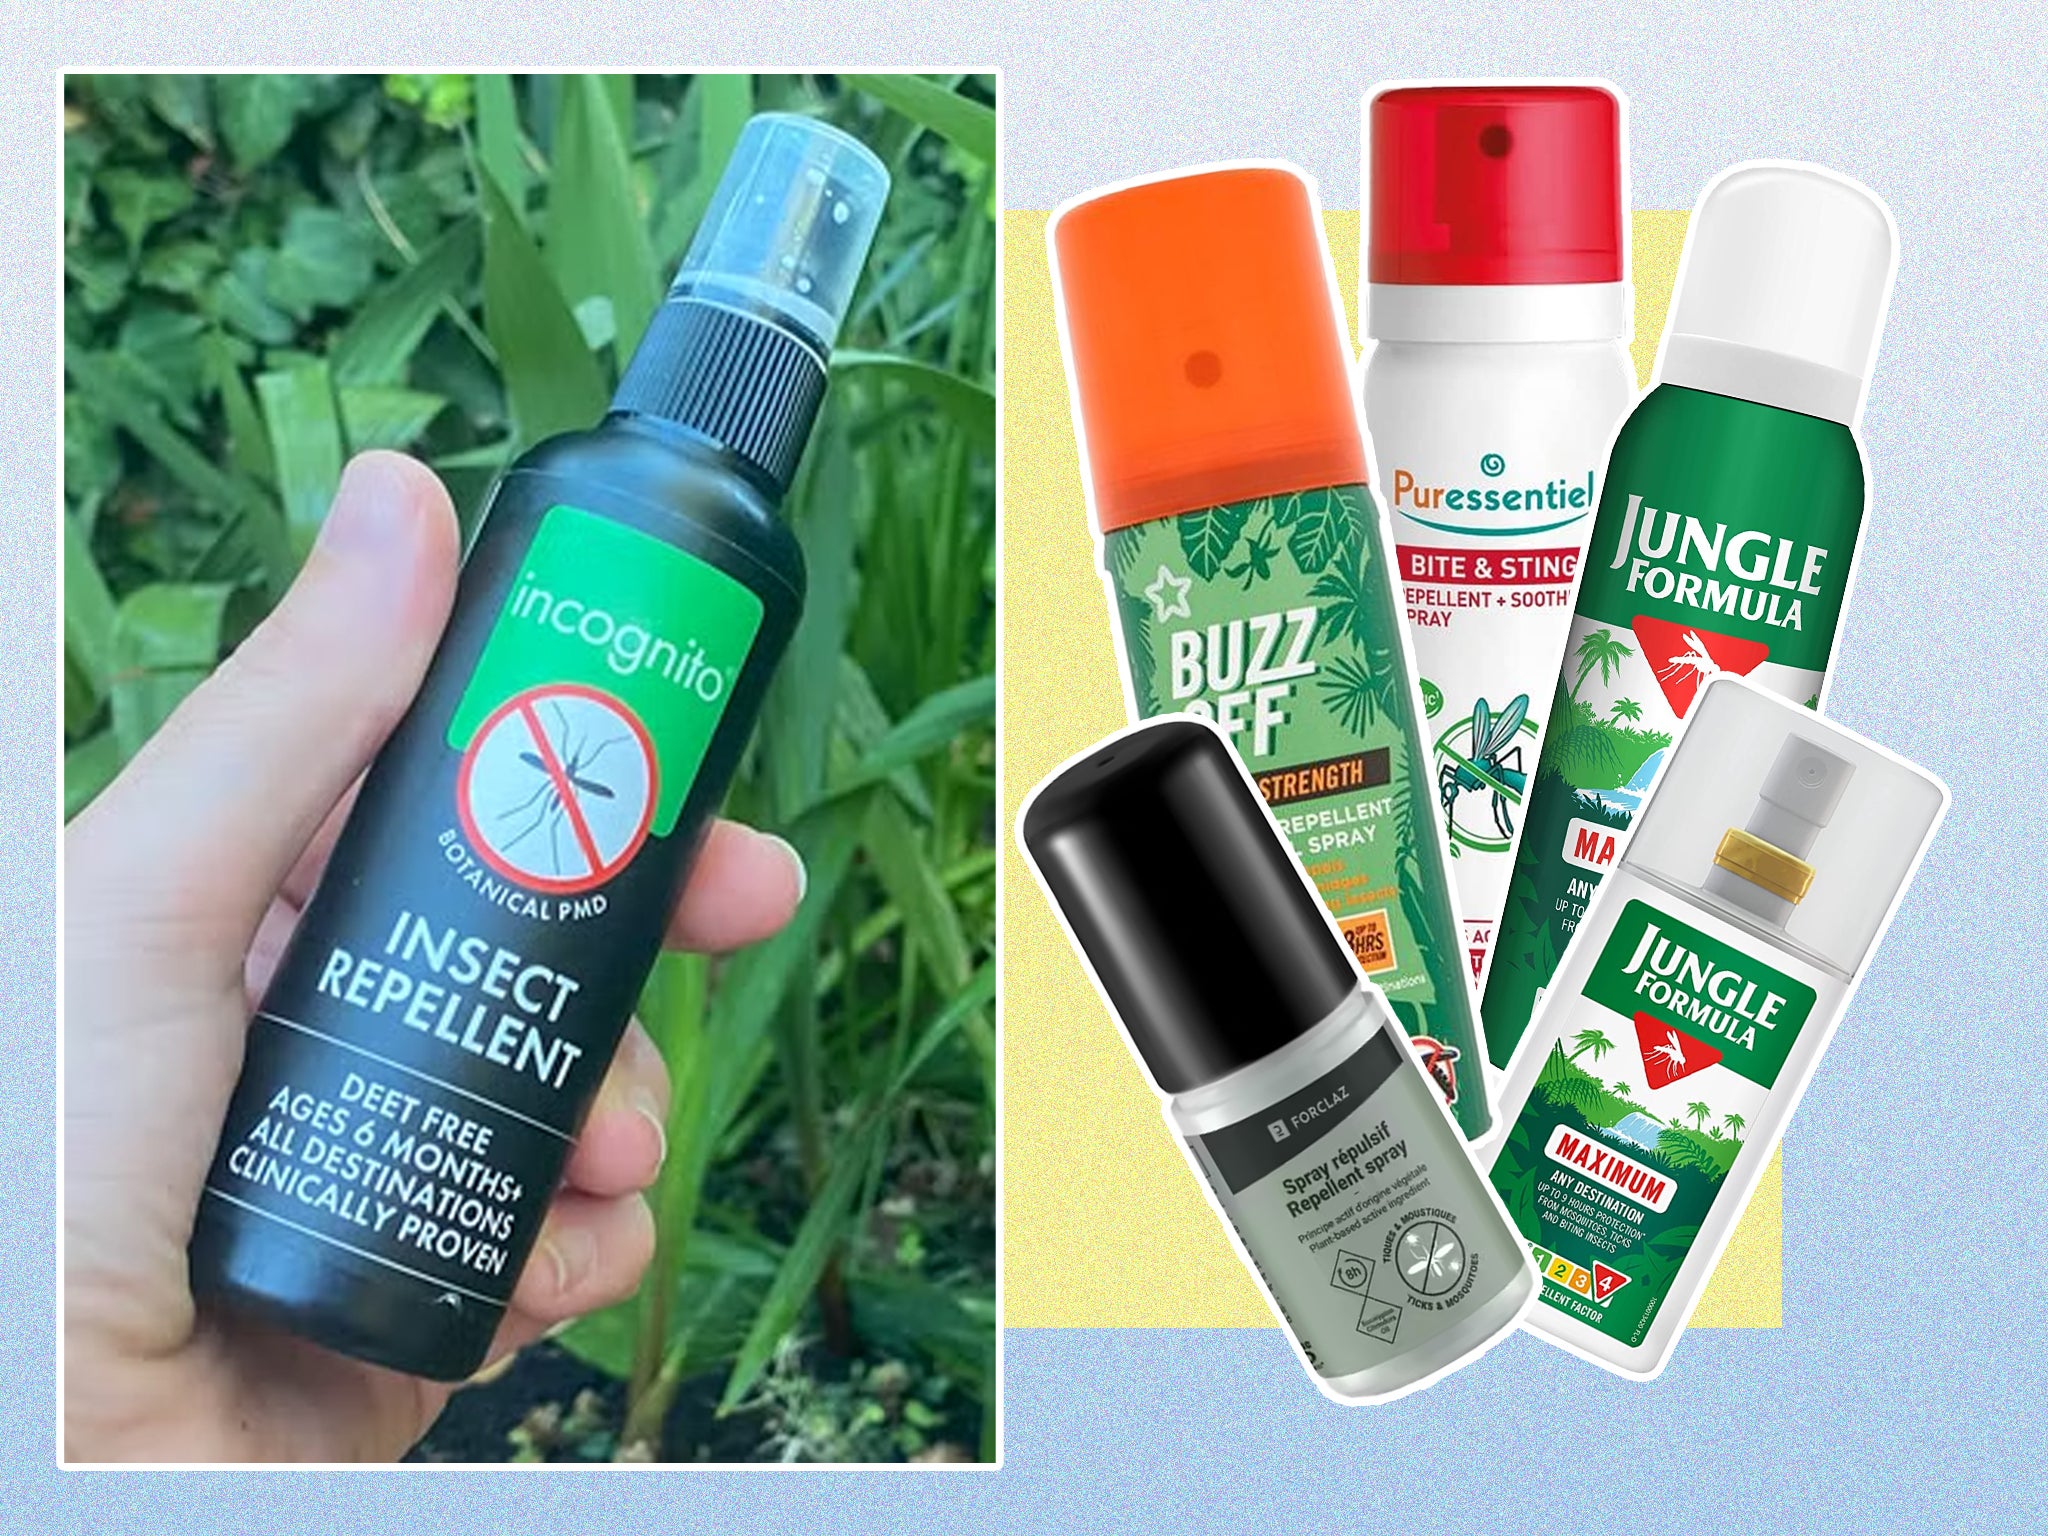 Six Feet Under, Natural Insect Repellent